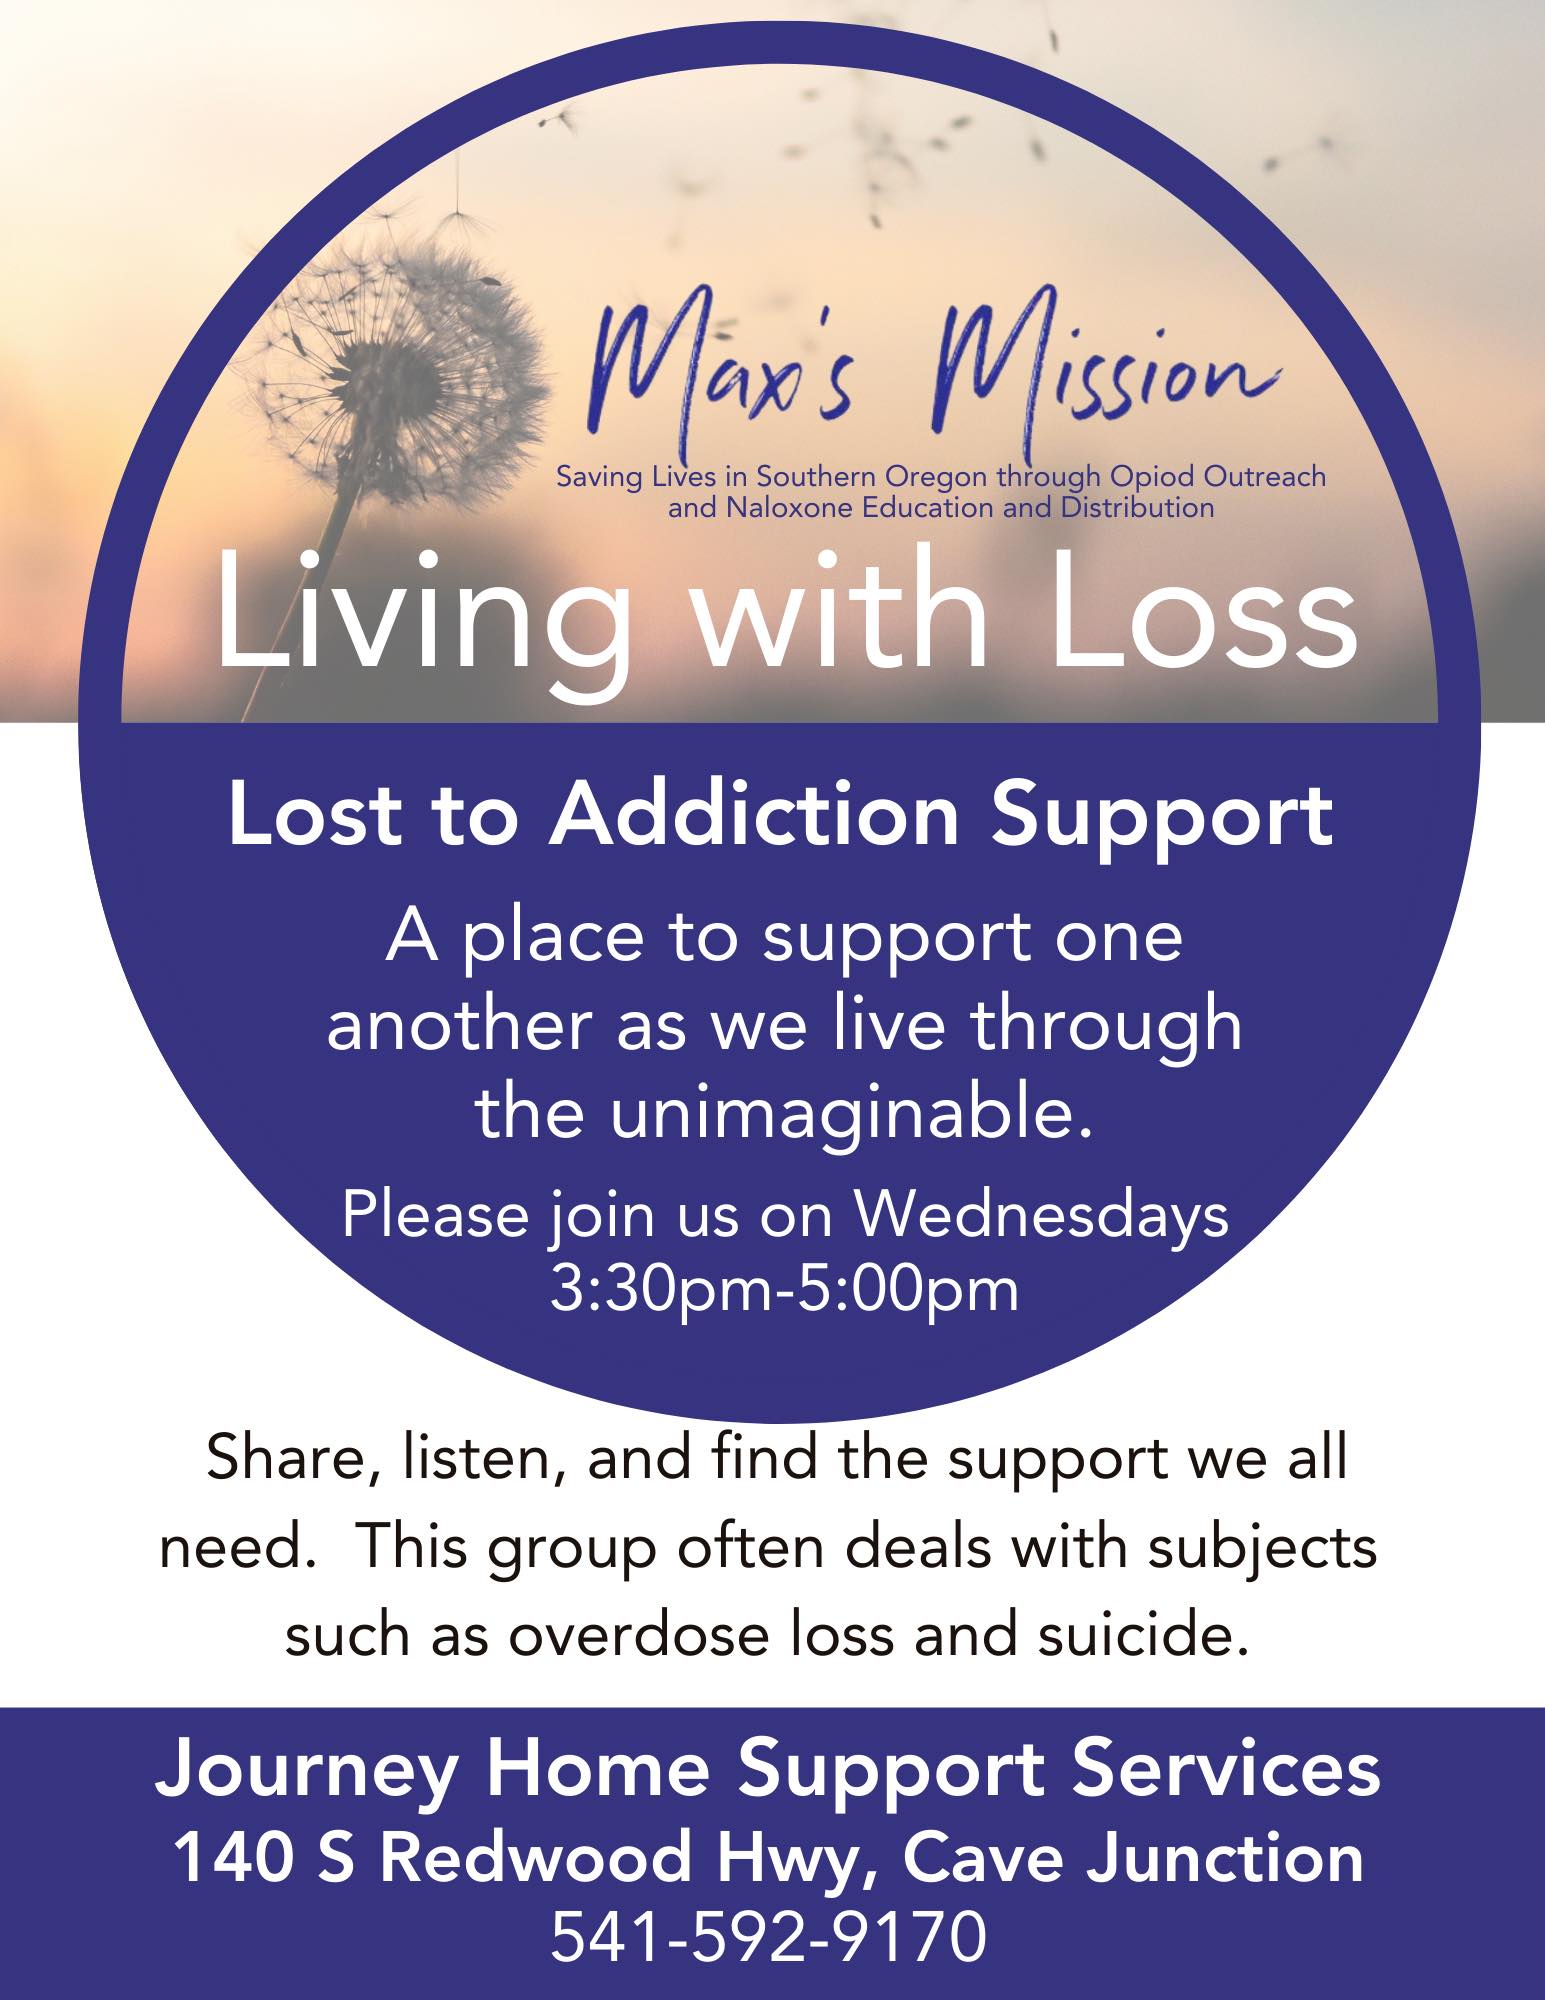 Living with Loss w/ Max’s Mission